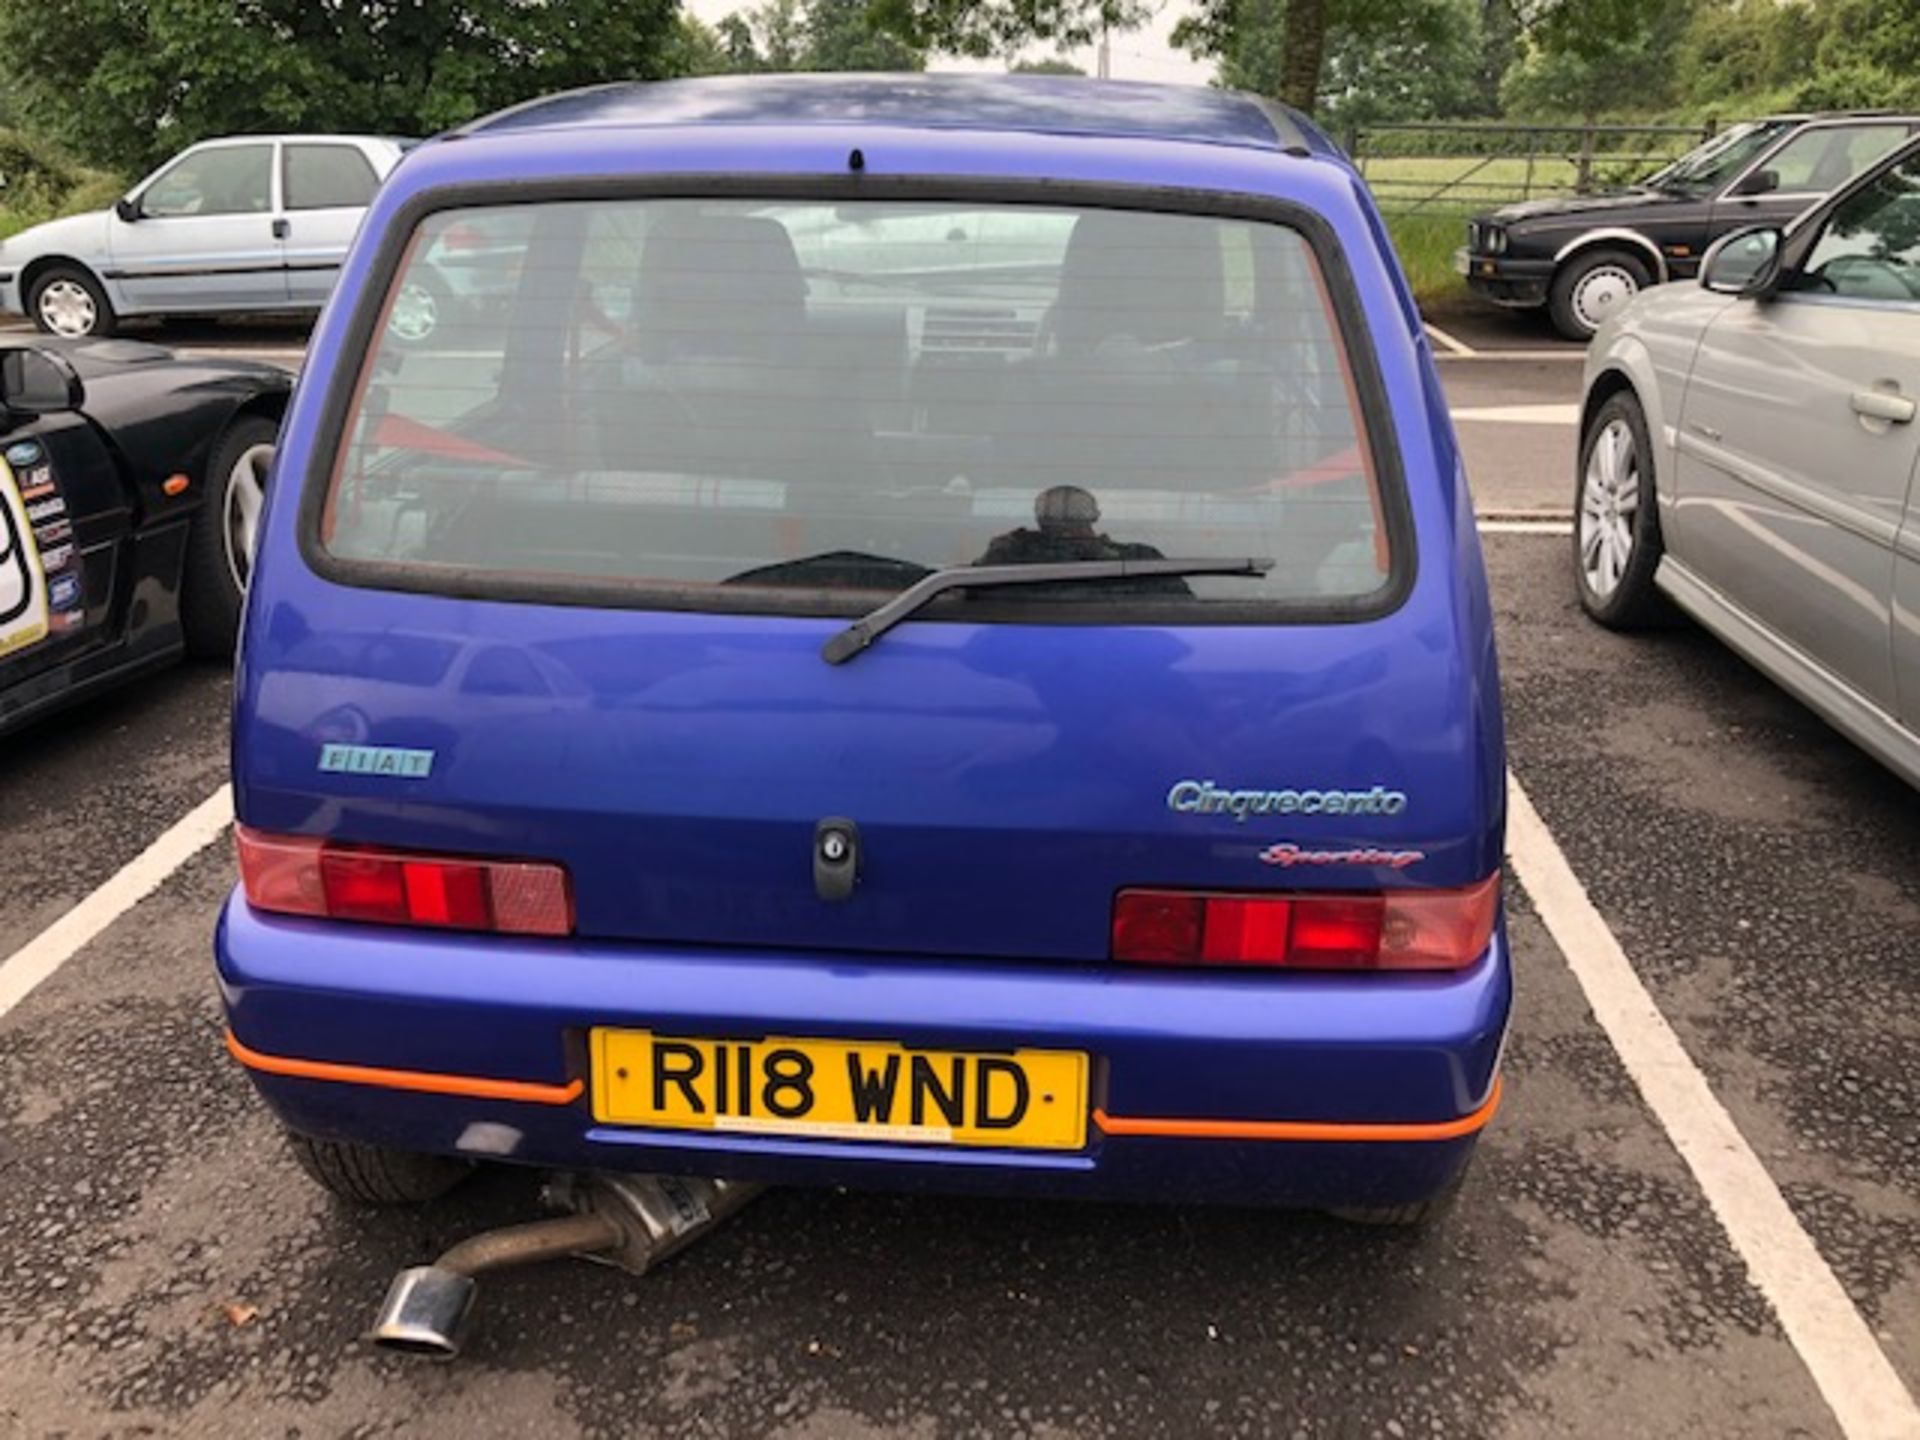 Fiat Cinquecento Reg No R118 WND 2 door in blue. We have V5 and keys, this vehicle started very - Image 4 of 6